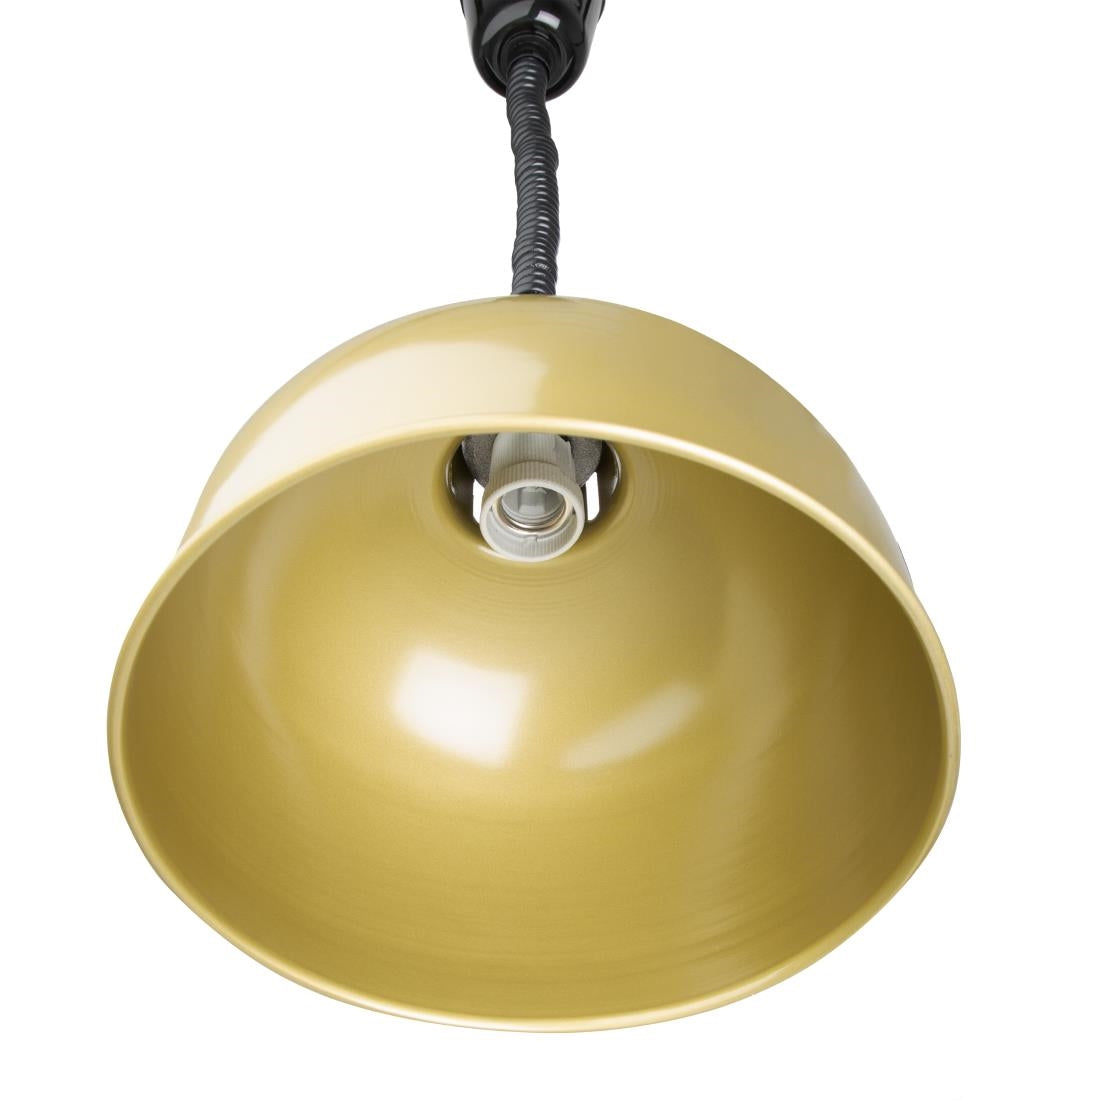 Buffalo Retractable Dome Heat Shade Pale Gold Finish JD Catering Equipment Solutions Ltd